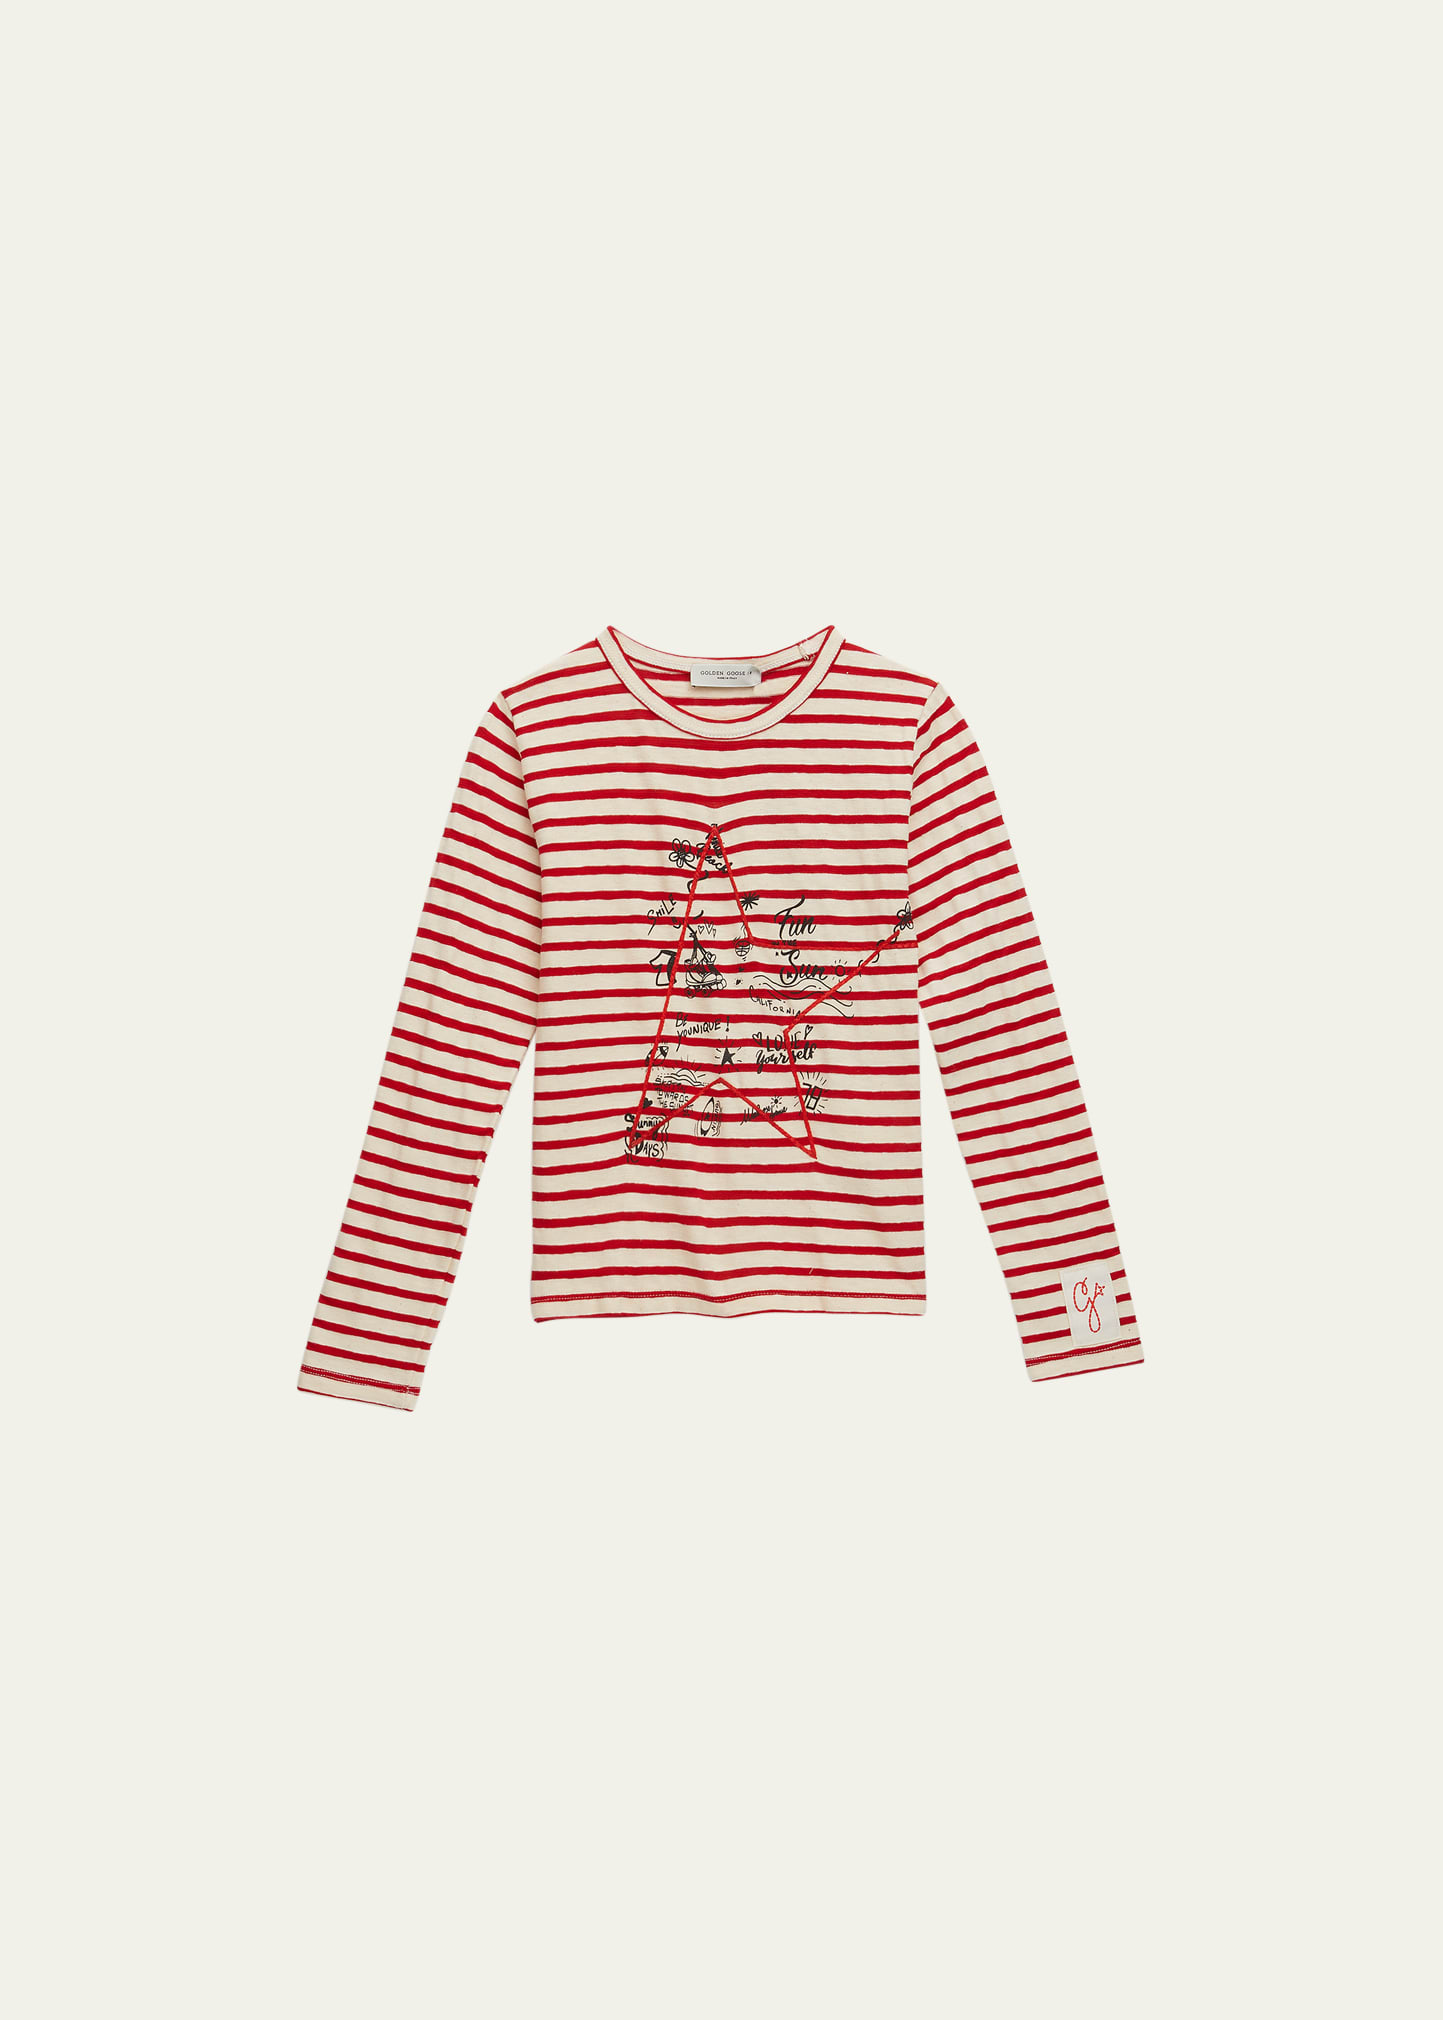 Girl's Striped Doodled T-Shirt, Size 4-10